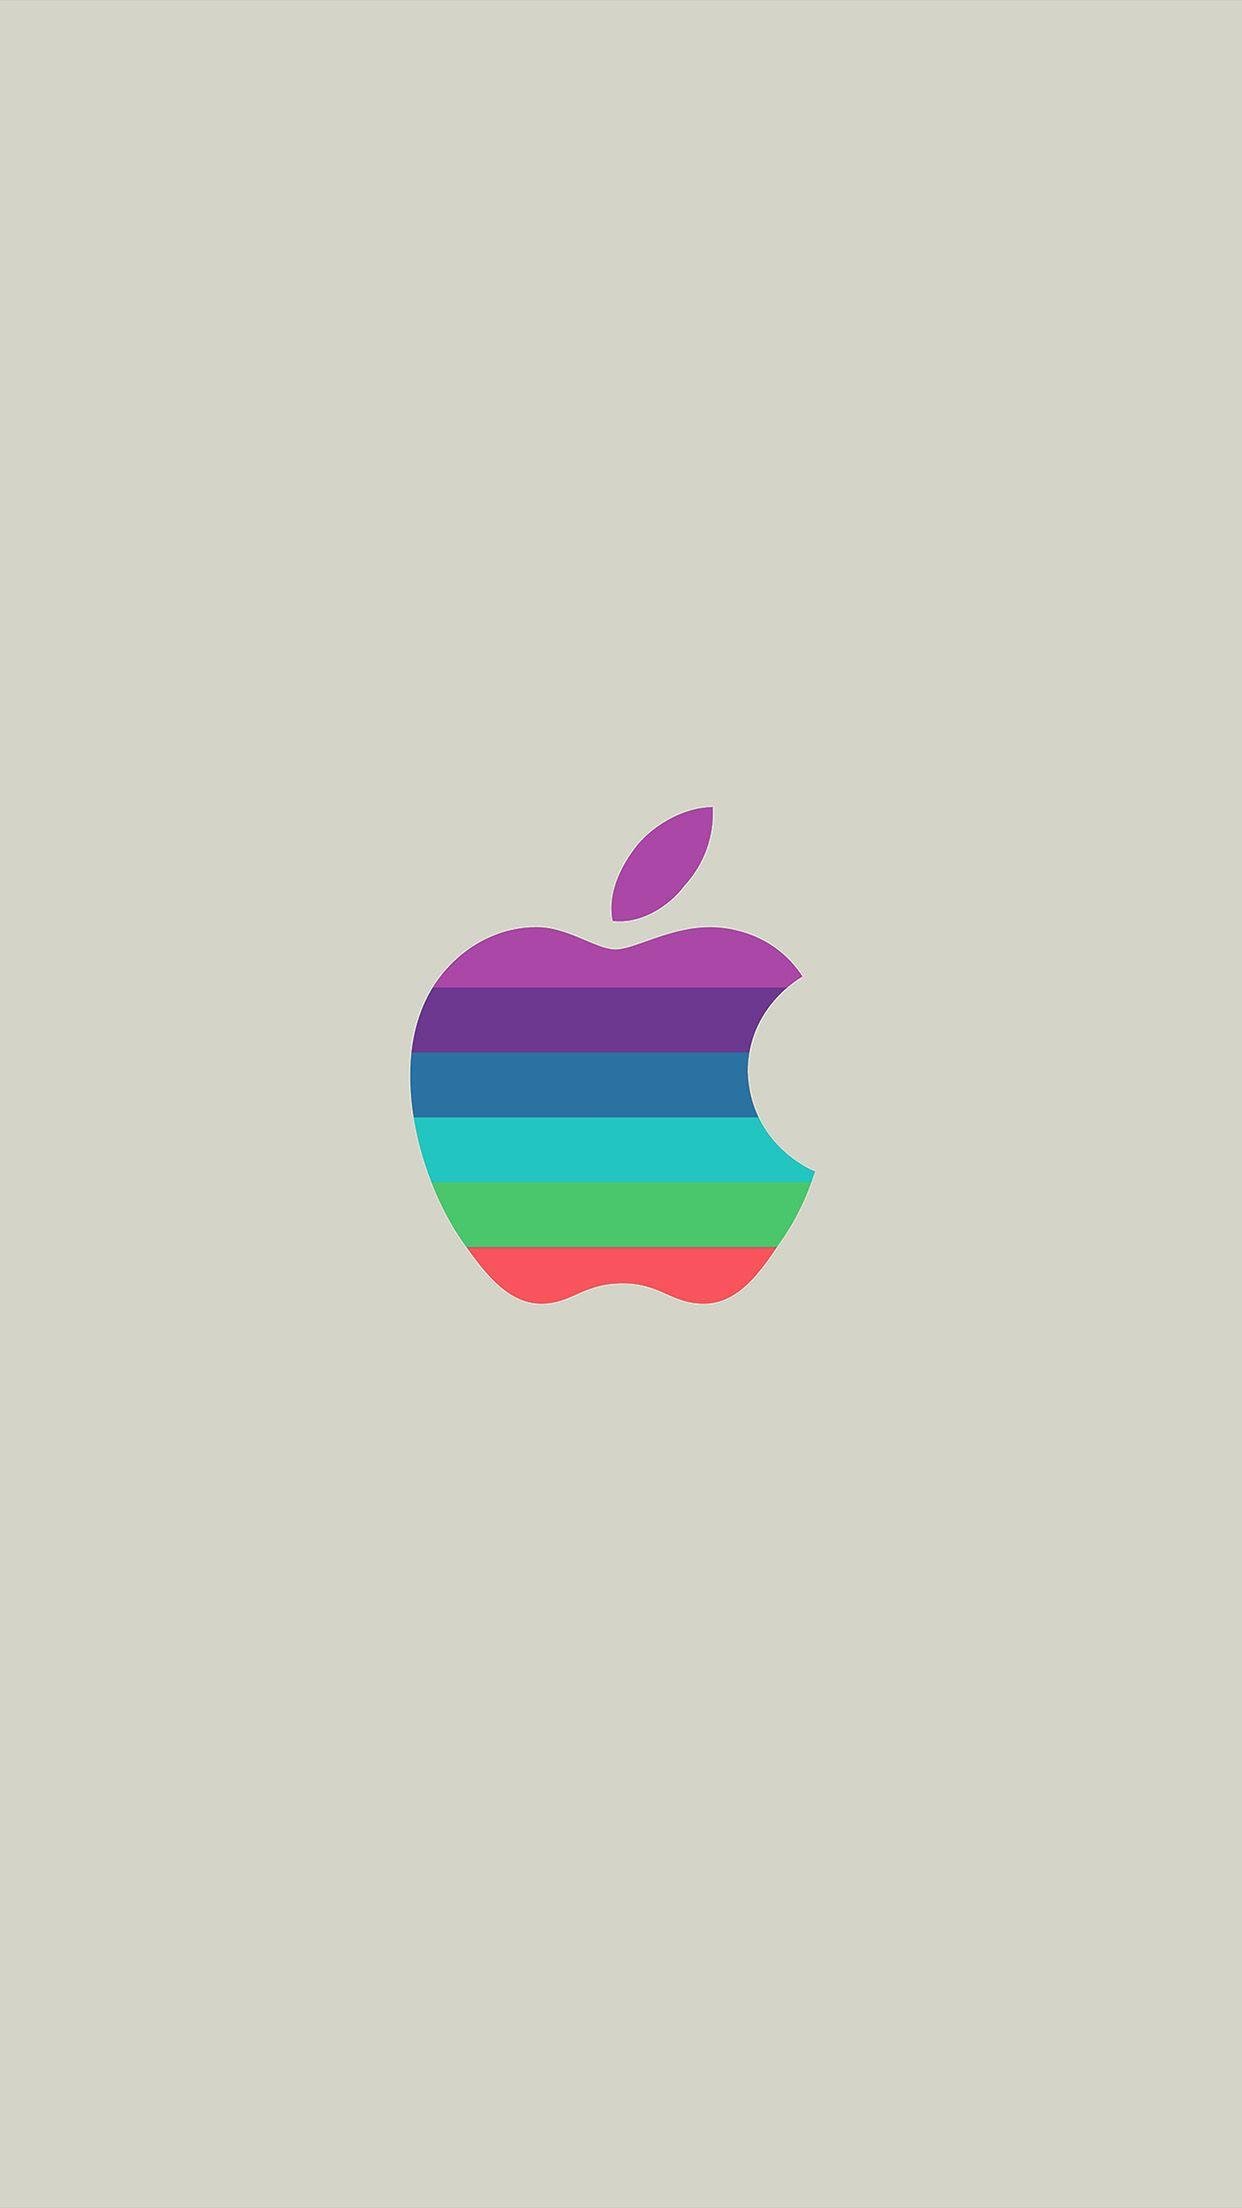 6 Color Logo - iPhone6papers.com | iPhone 6 wallpaper | aw32-minimal-logo-apple ...